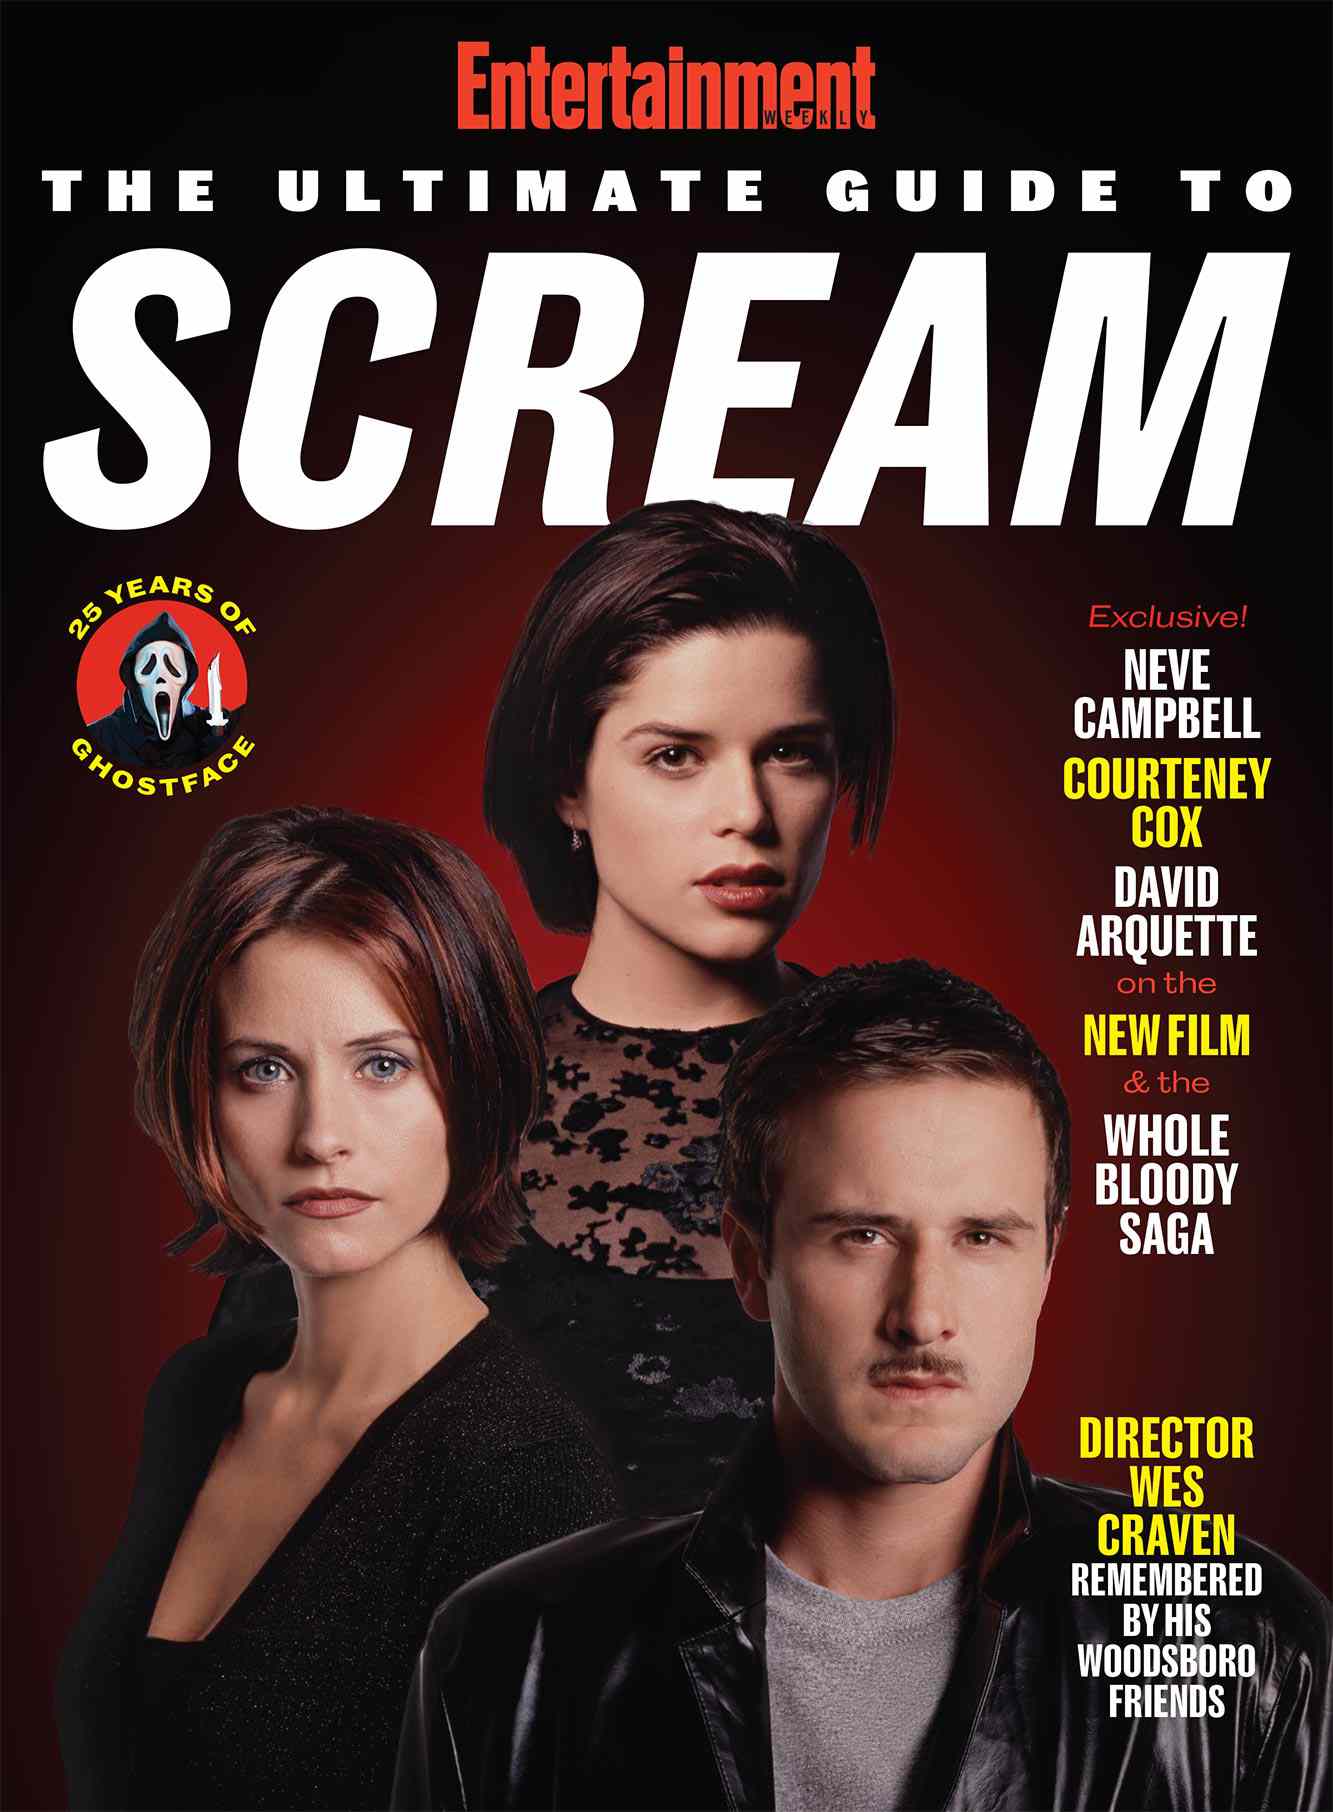 Entertainment Weekly's The Ultimate Guide to Scream